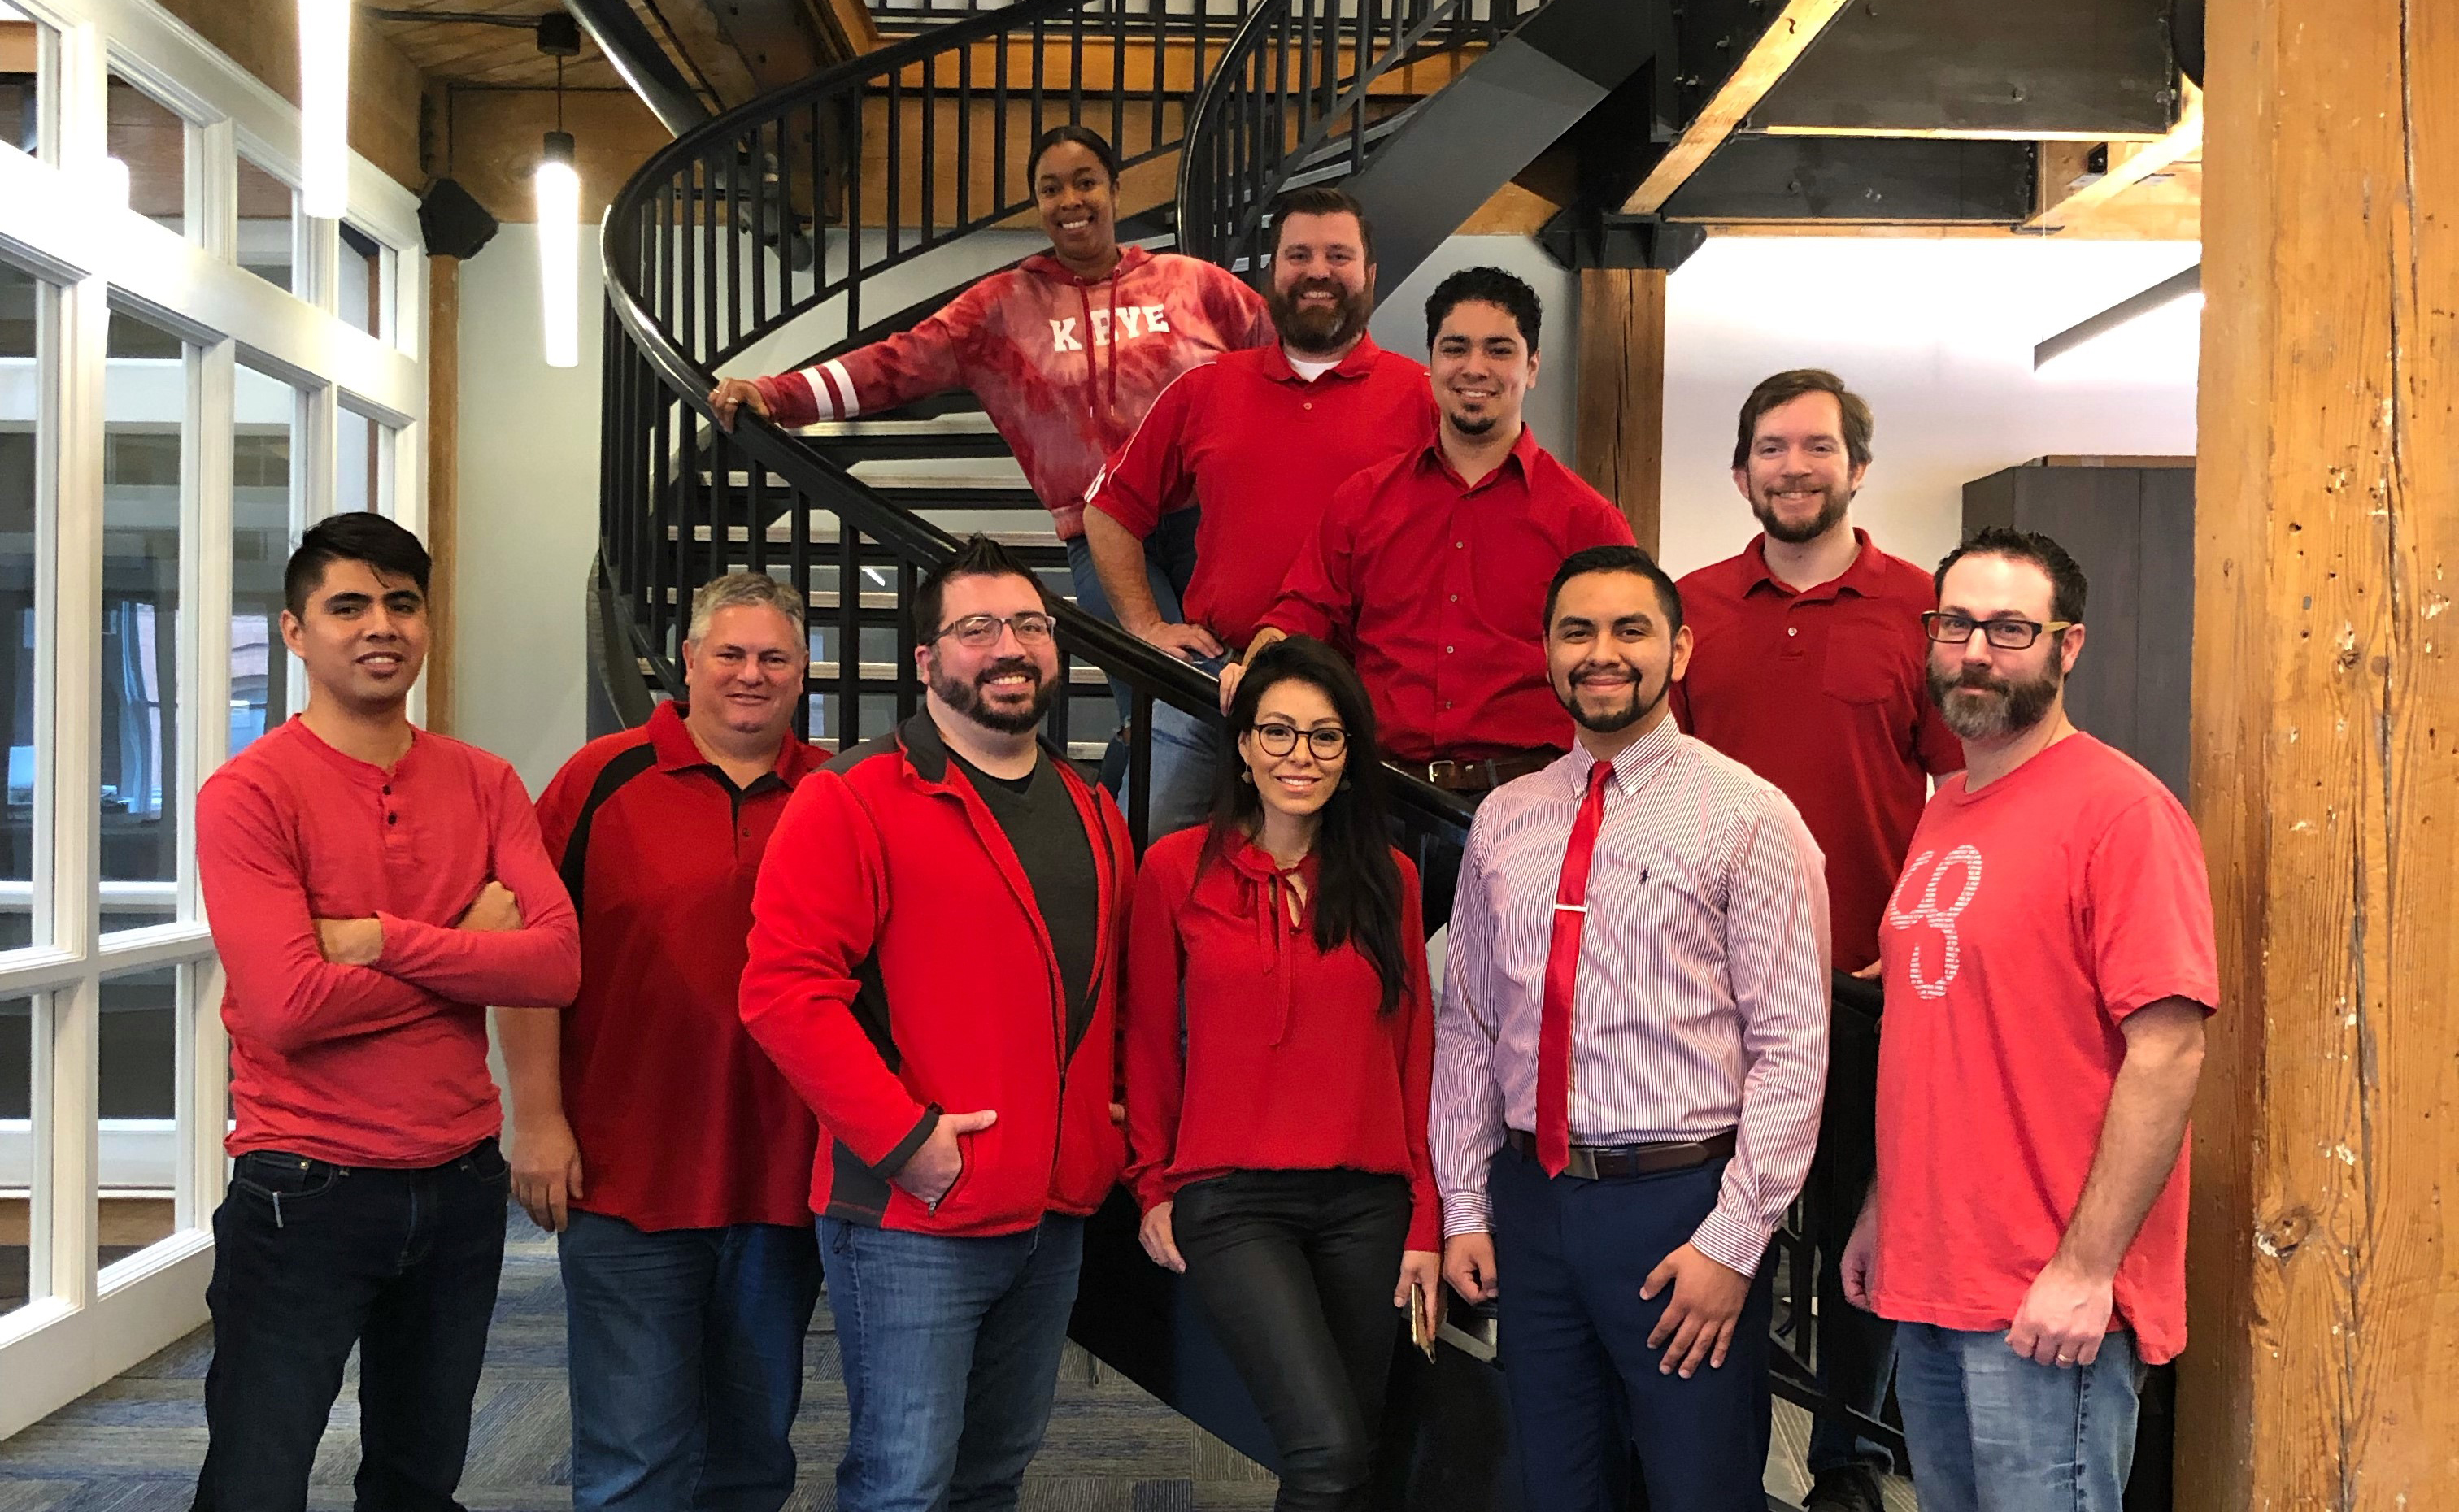 E4H Dallas team wearing red shirts standing in front of stairs